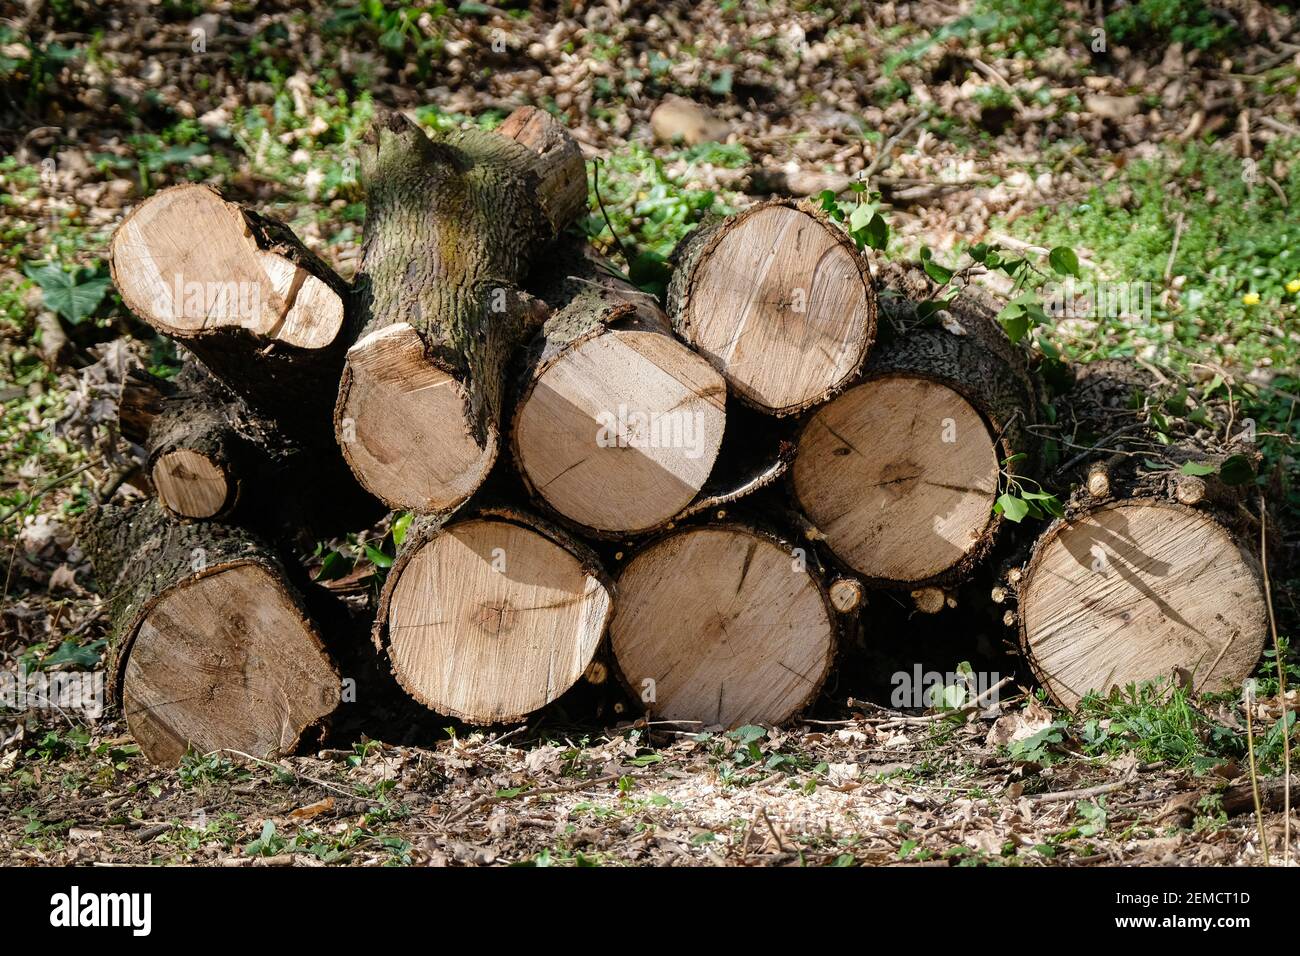 Lyon, France, on February 24, 2021. Logs in a forest. Stock Photo